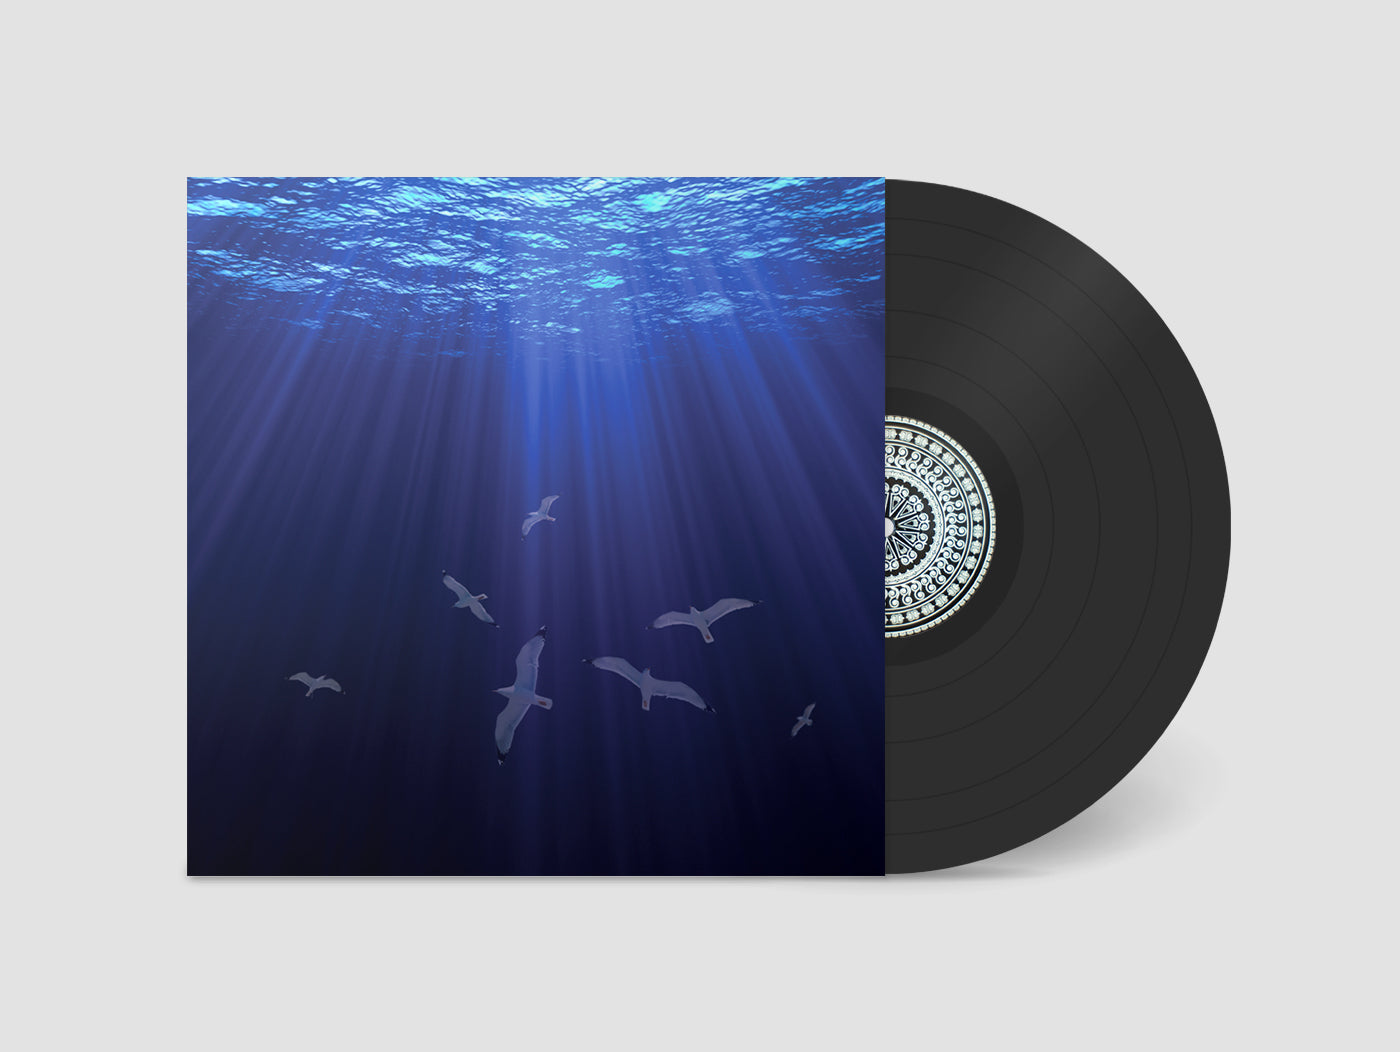 NEW VINYL STOCK - Stone In - The Drop and The Sea